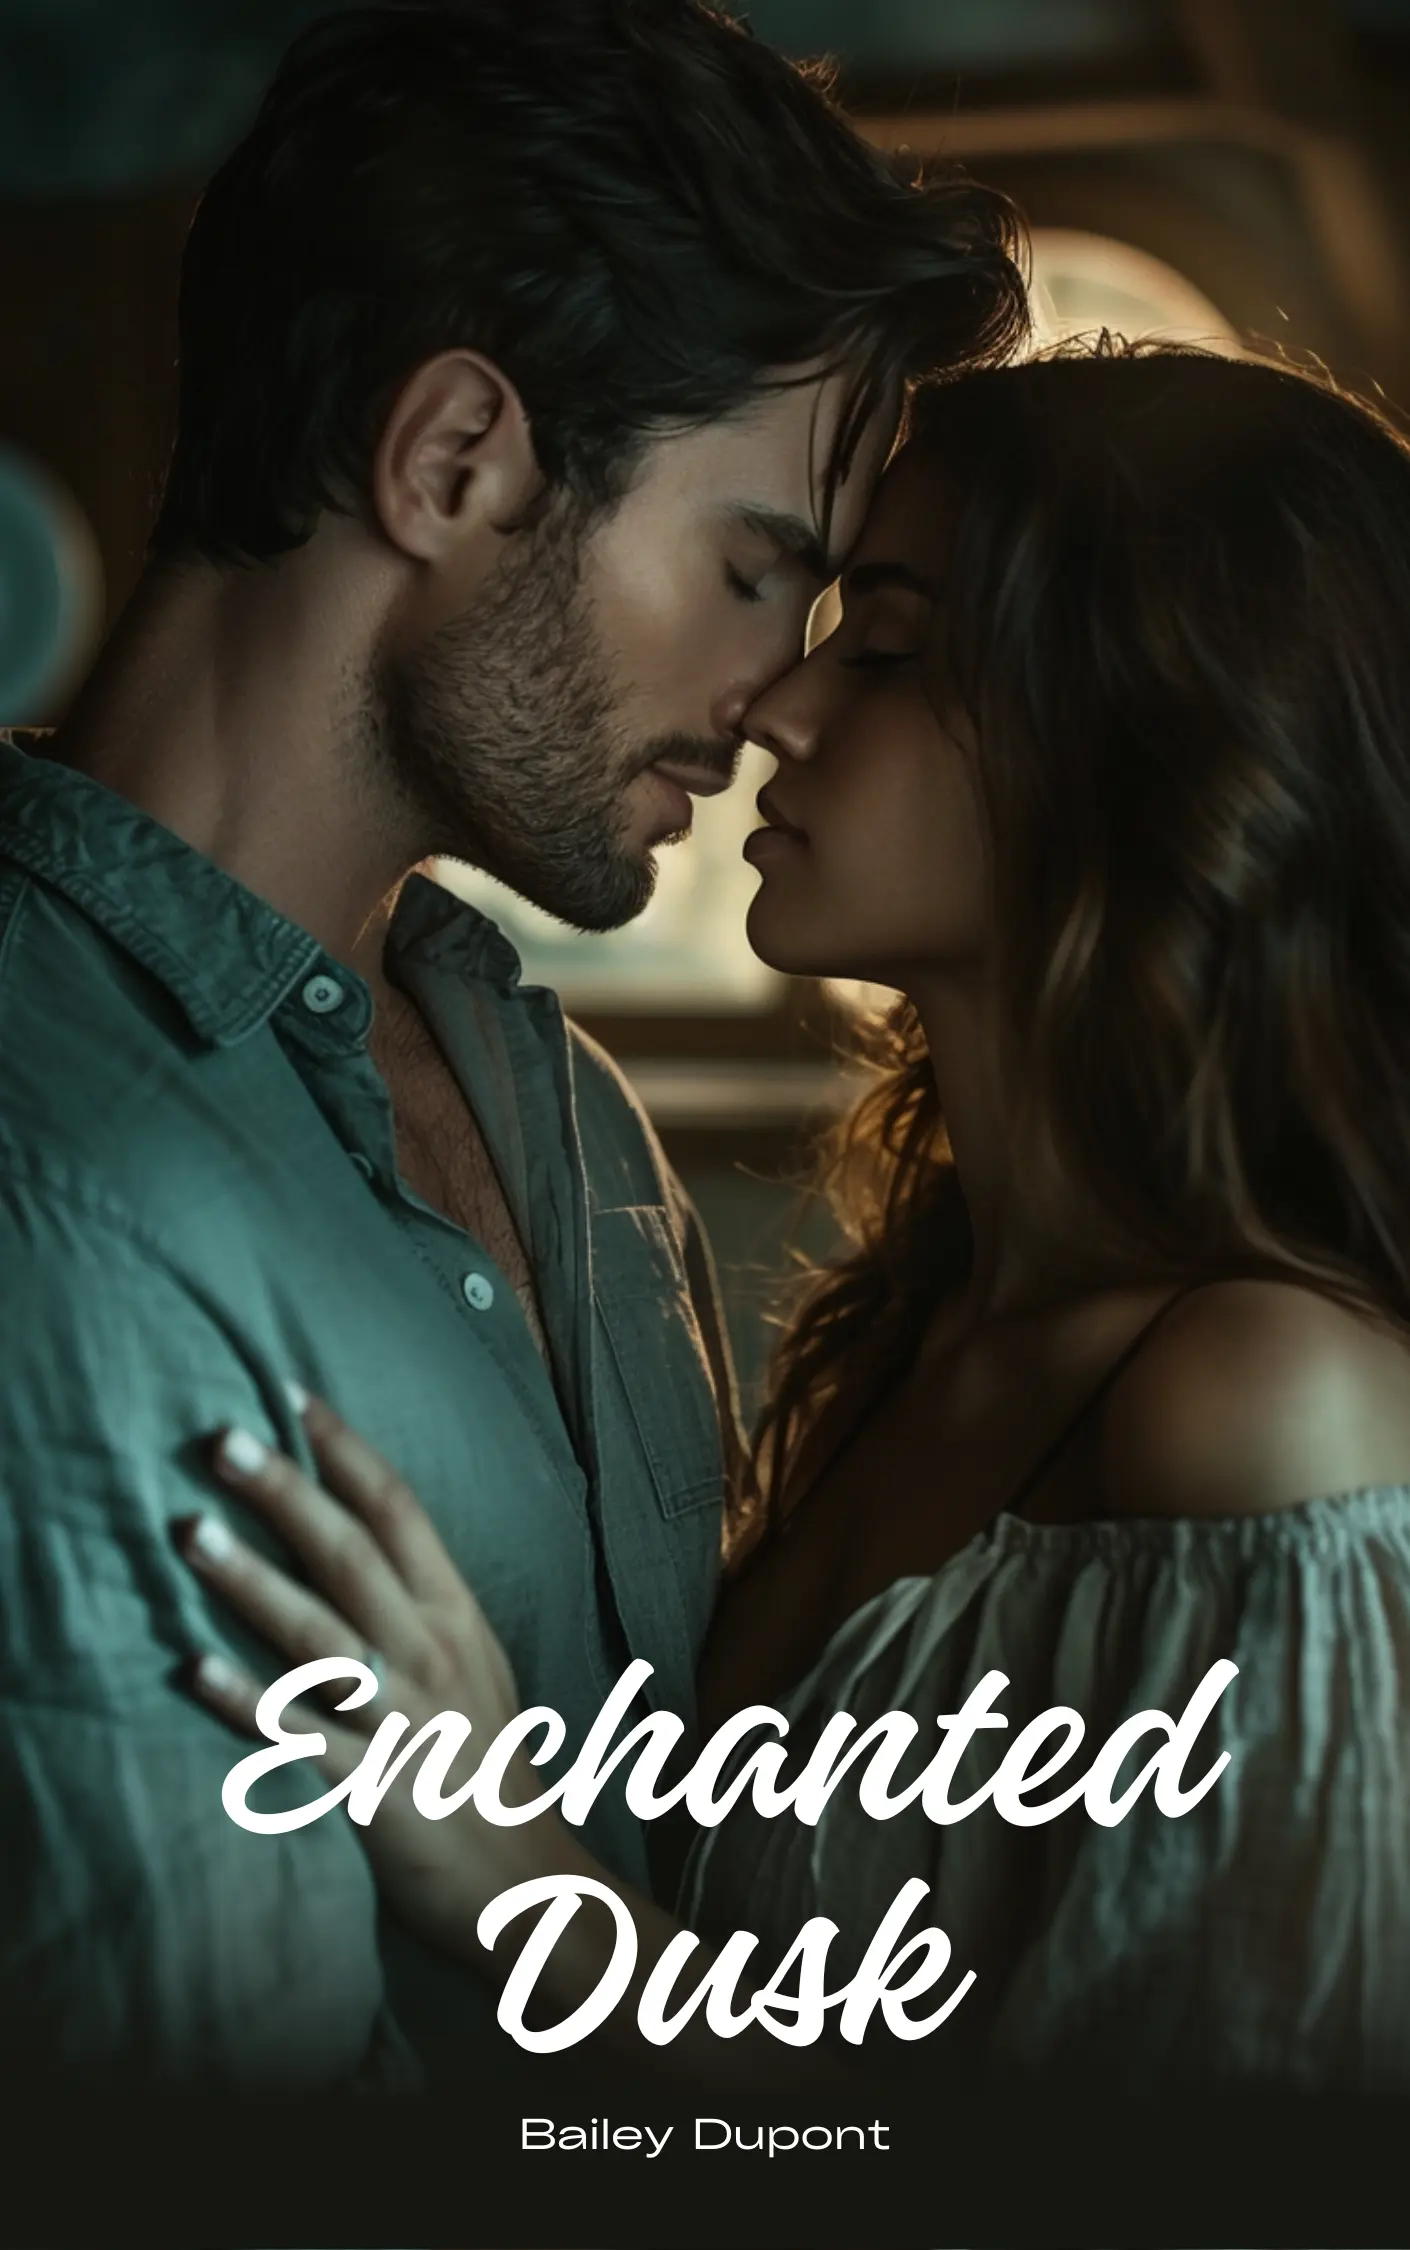 Romantic couple embraced in dim lighting, capturing love in moody atmosphere book cover design using ai